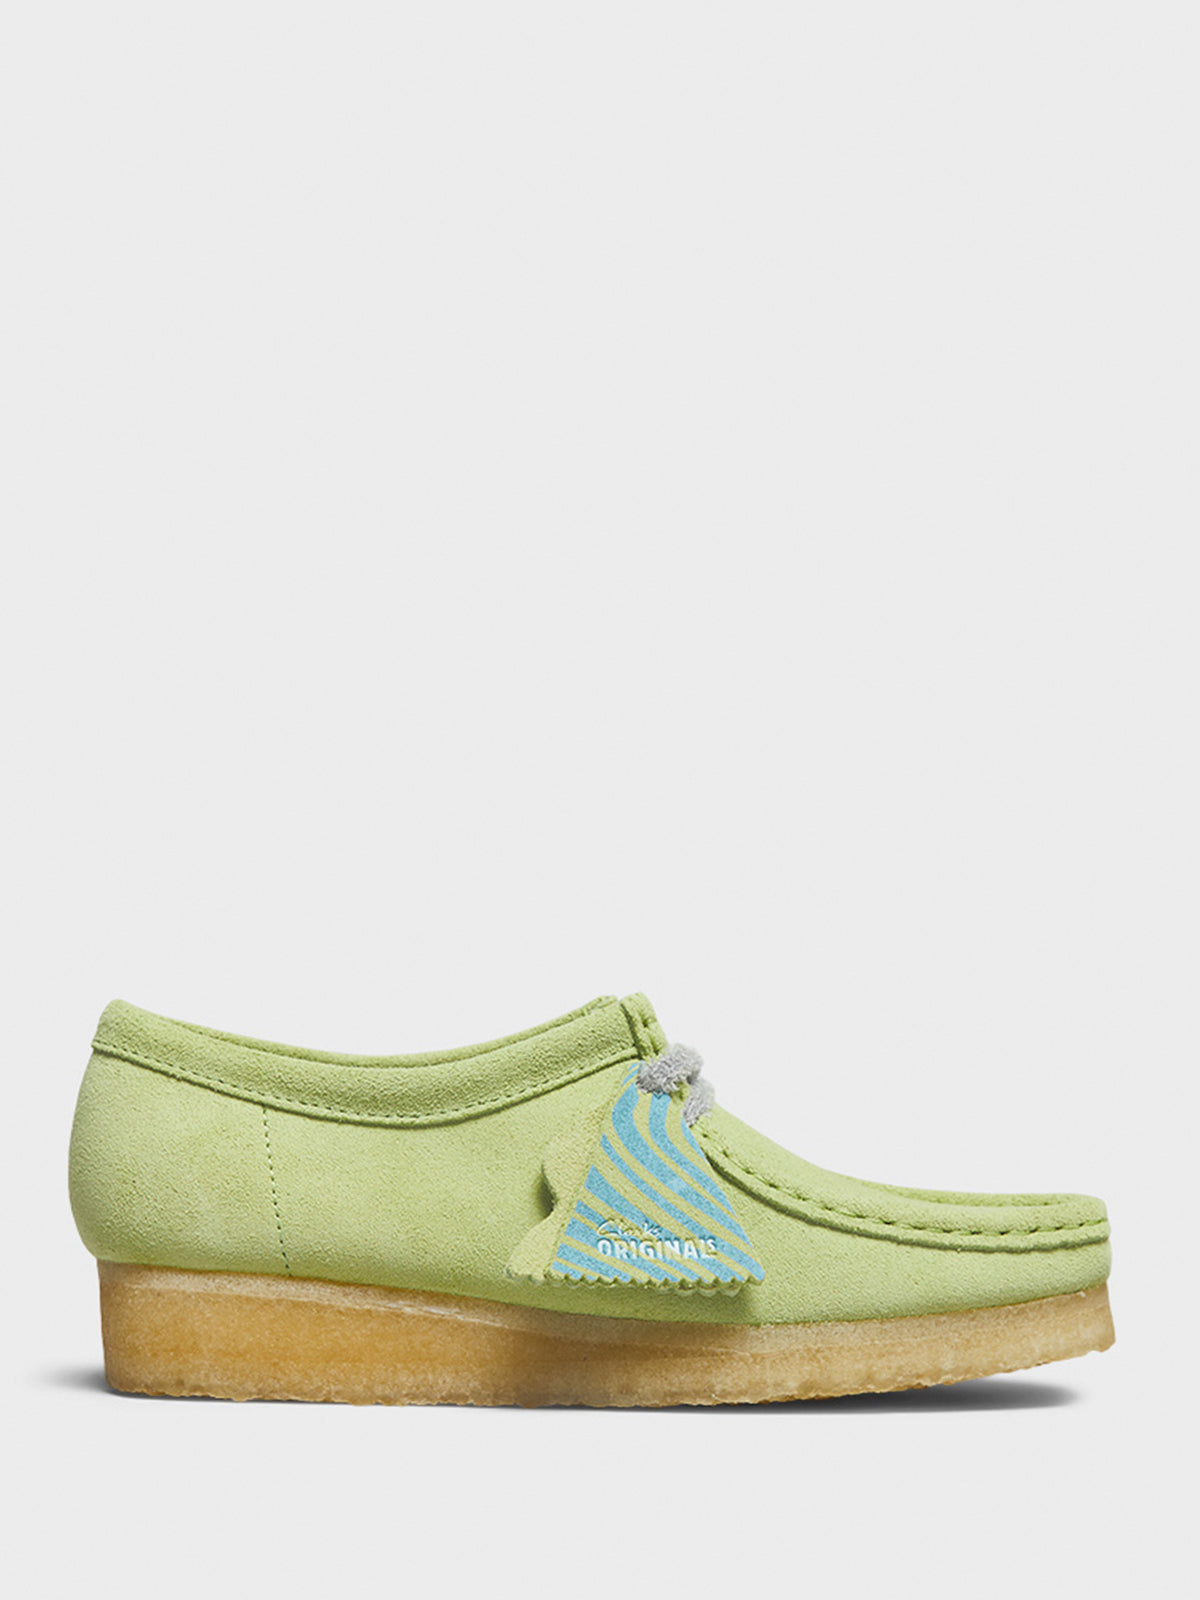 Clarks - Women's Wallabee Shoes in Pale Lime Suede